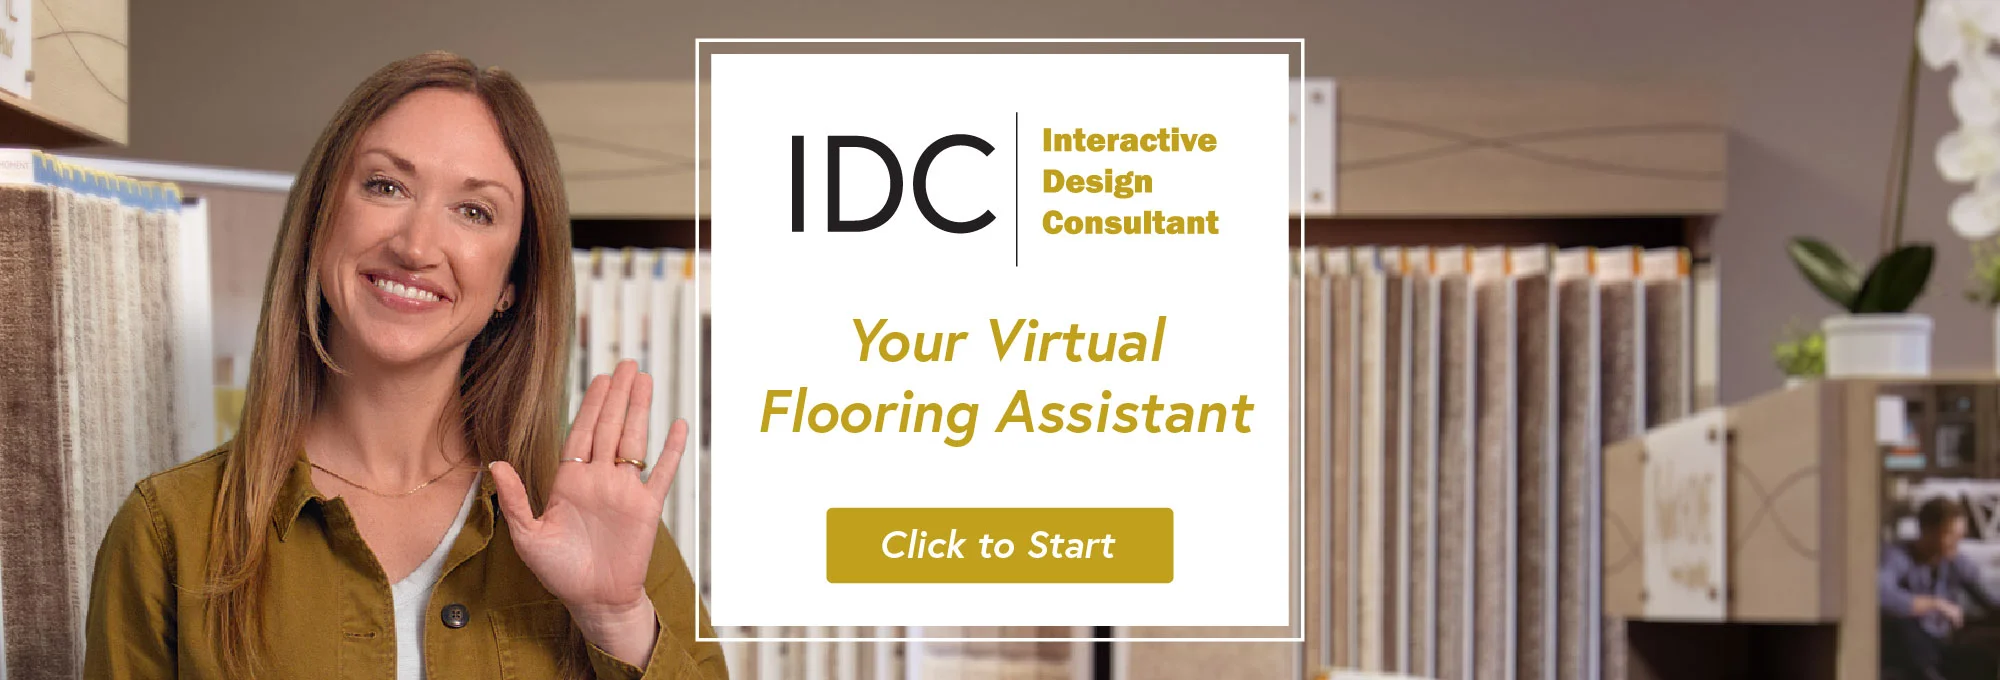 Start with our Interactive Design Consultant at Howard young Flooring in Milton, FL